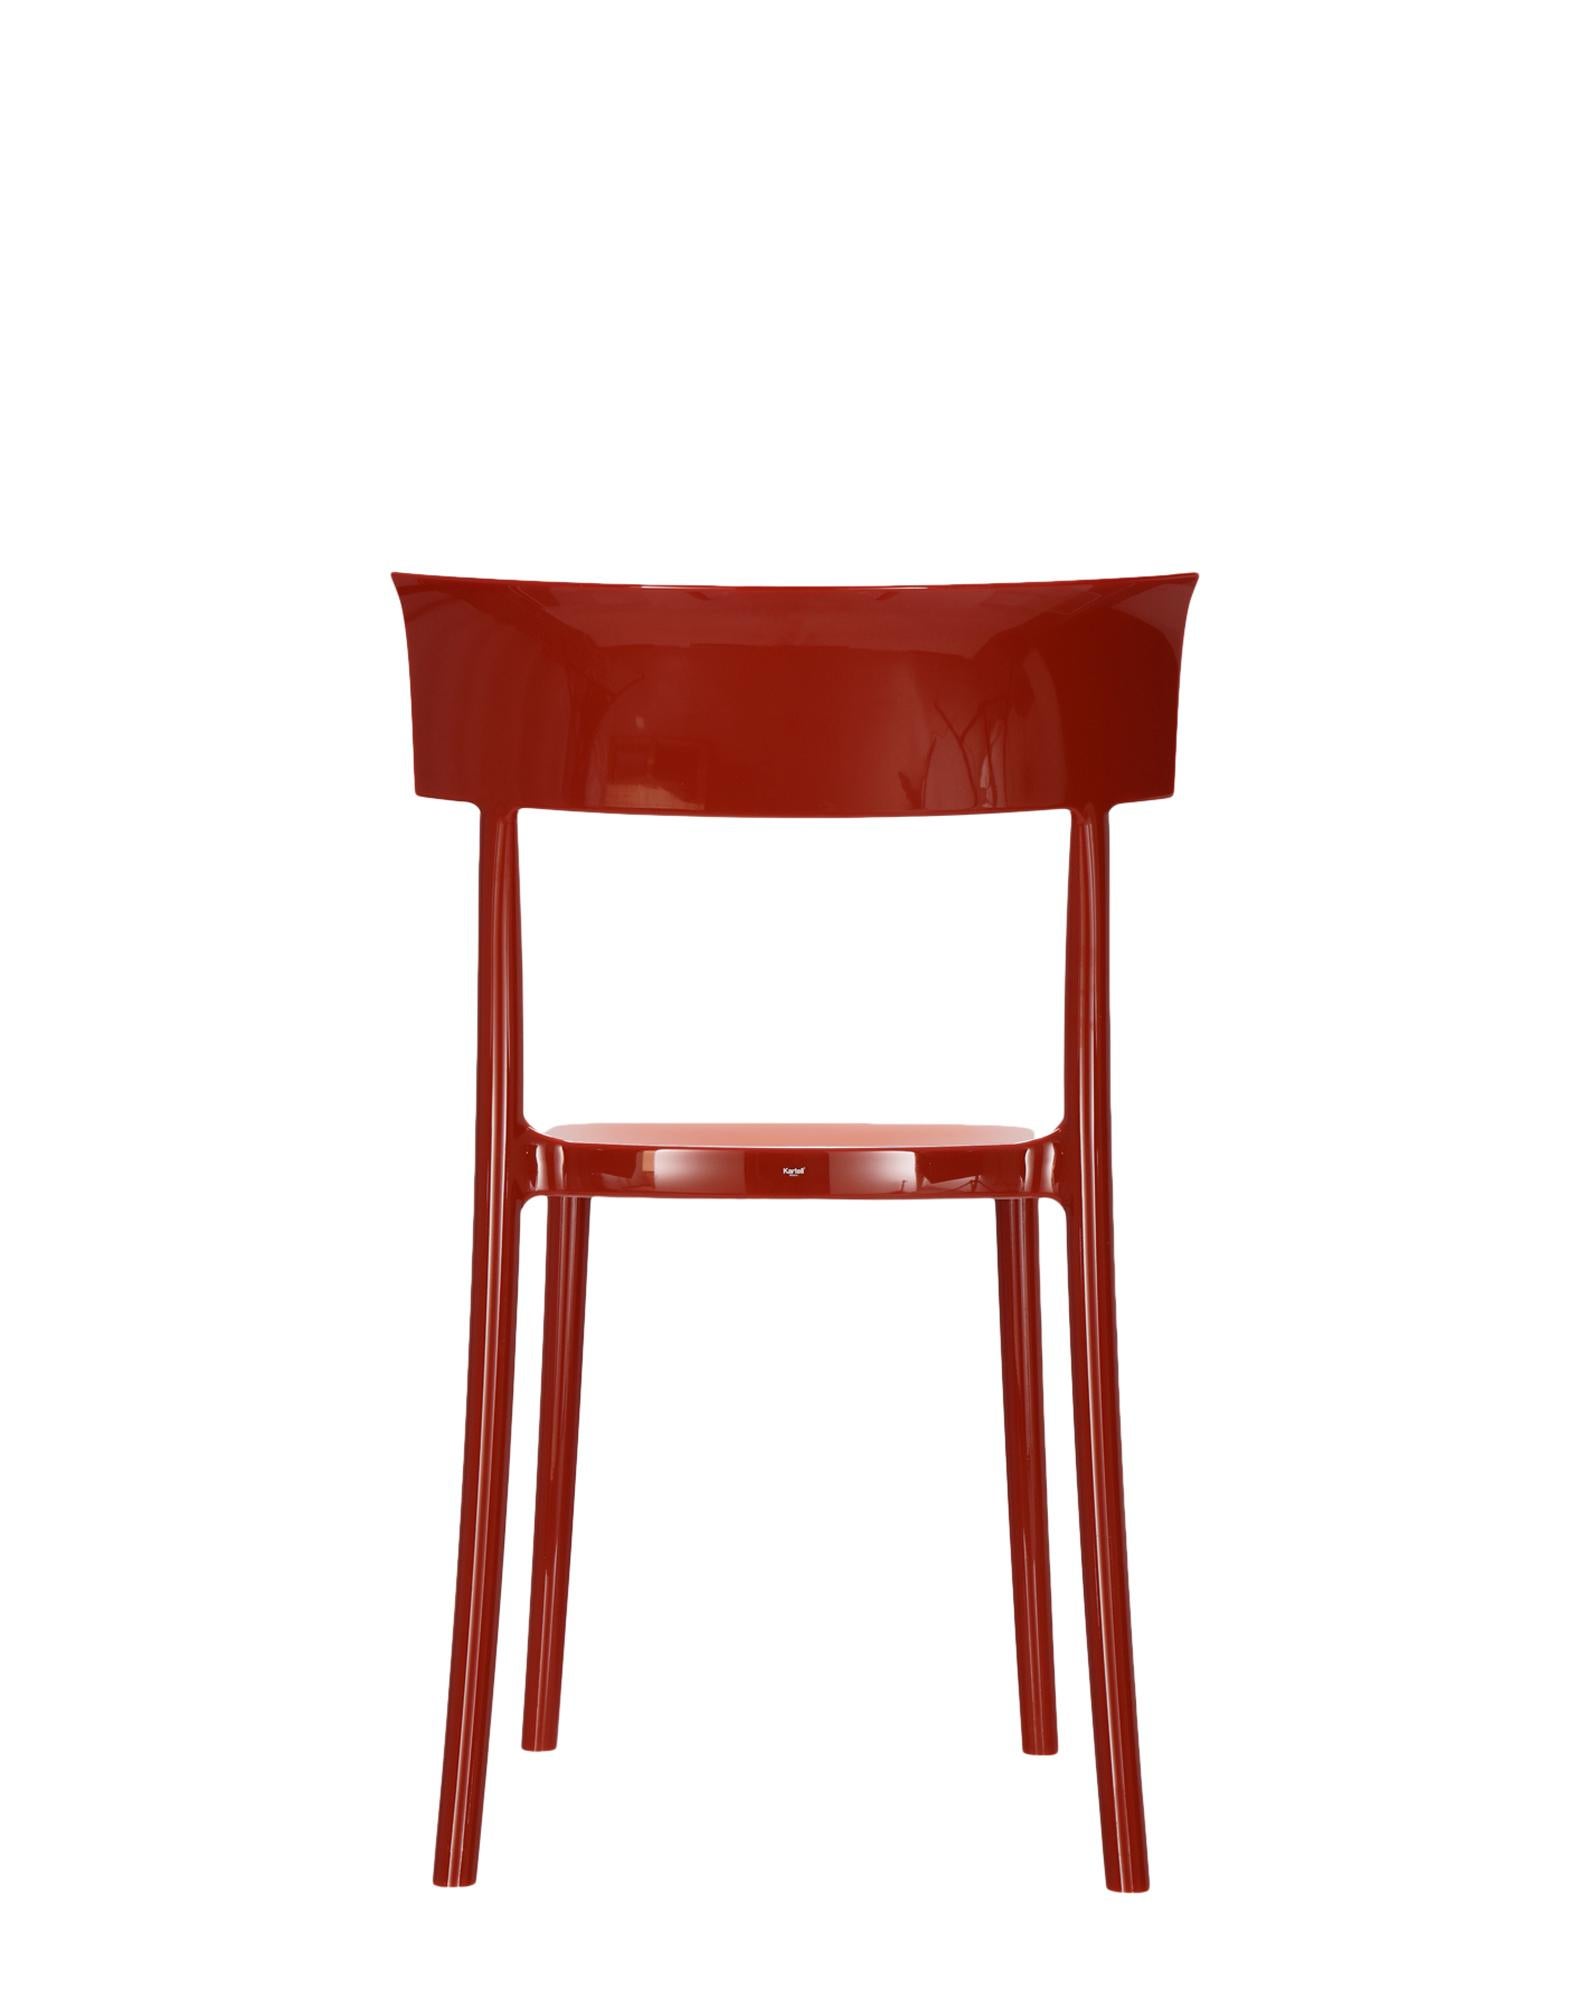 Kartell Cat Walk Chair in Rusty Orange by Philippe Starck with Sergio Schito In New Condition For Sale In Brooklyn, NY